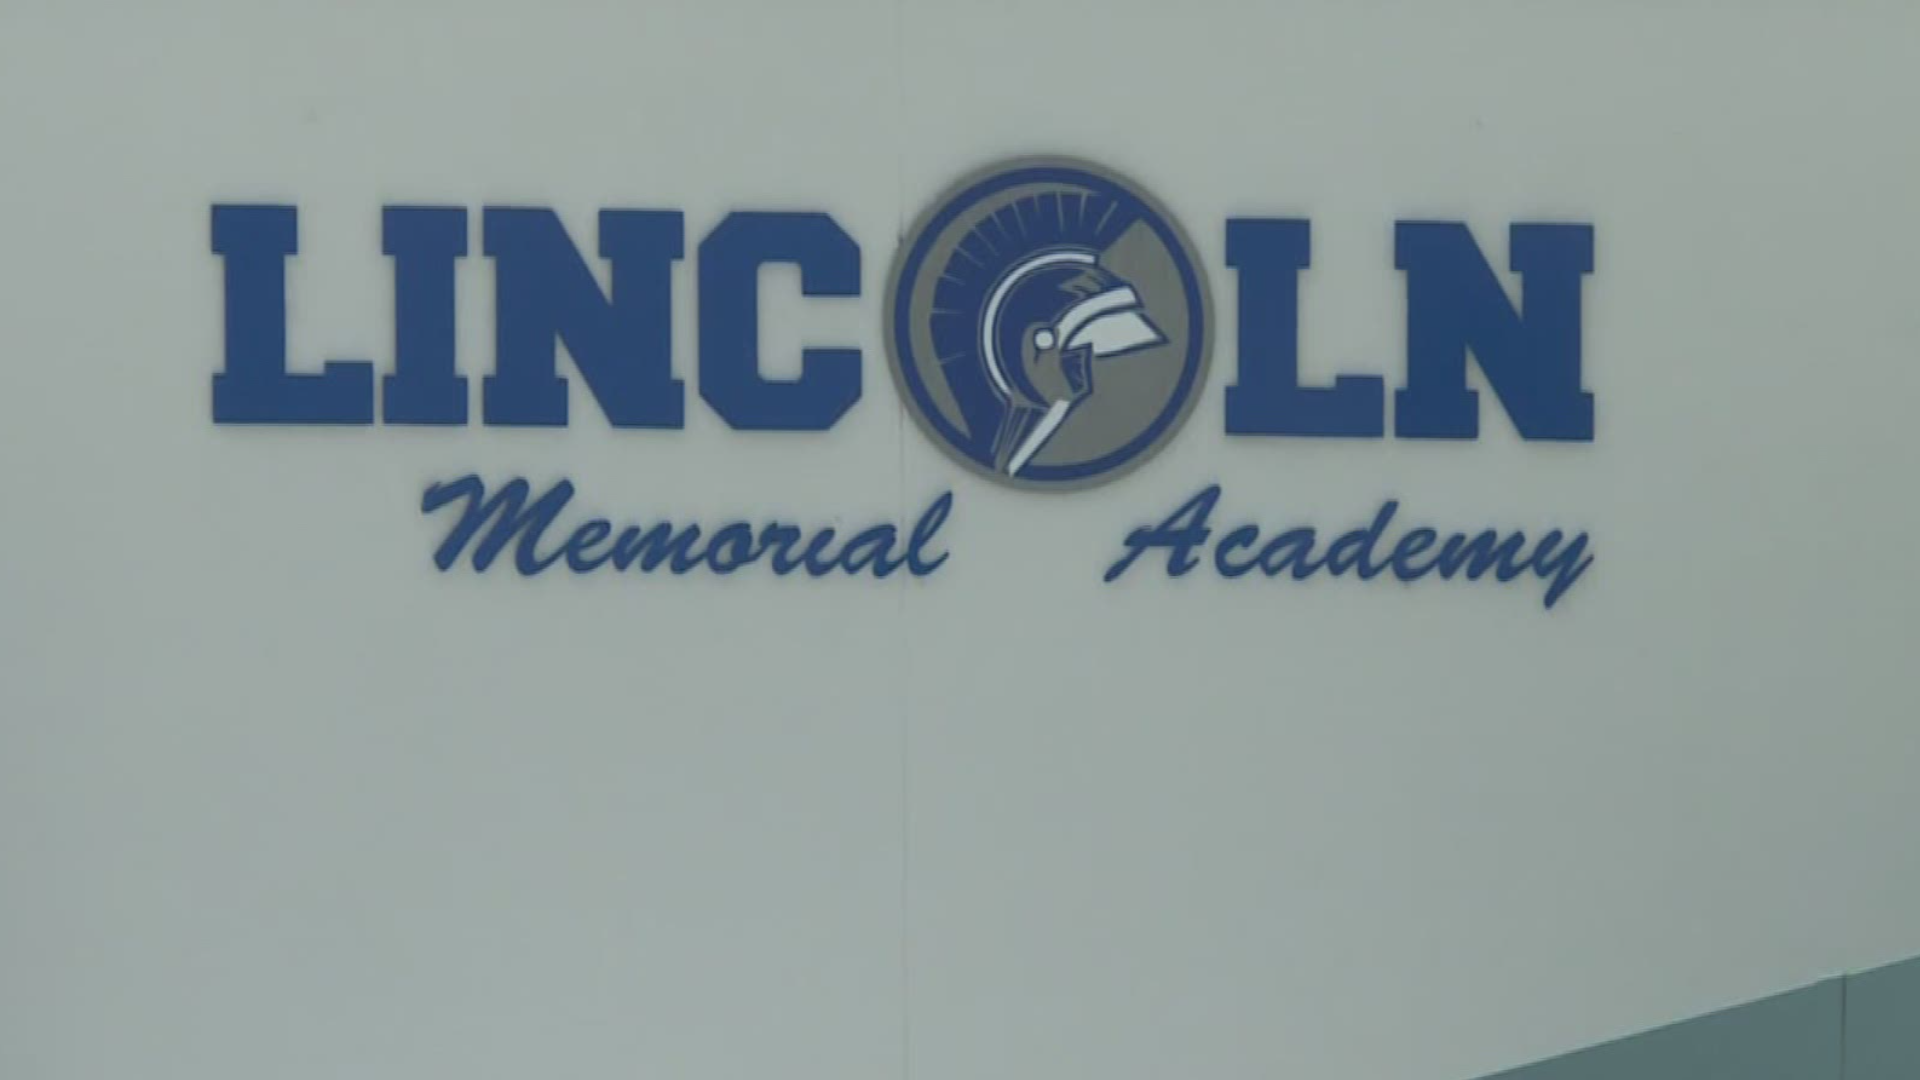 The US Department of Education opened a federal investigation into Lincoln Memorial Academy's former principal, Eddie Hundley and the school’s Chief Financial Officer Cornelle Maxfield. 

The investigation names several potential violations including fraud, bribery, embezzlement, mail fraud, wire fraud and conspiracy to commit offense or to defraud the US. 

The Department of Education Inspector General has requested several documents including personnel files of Hundley and Maxfield.